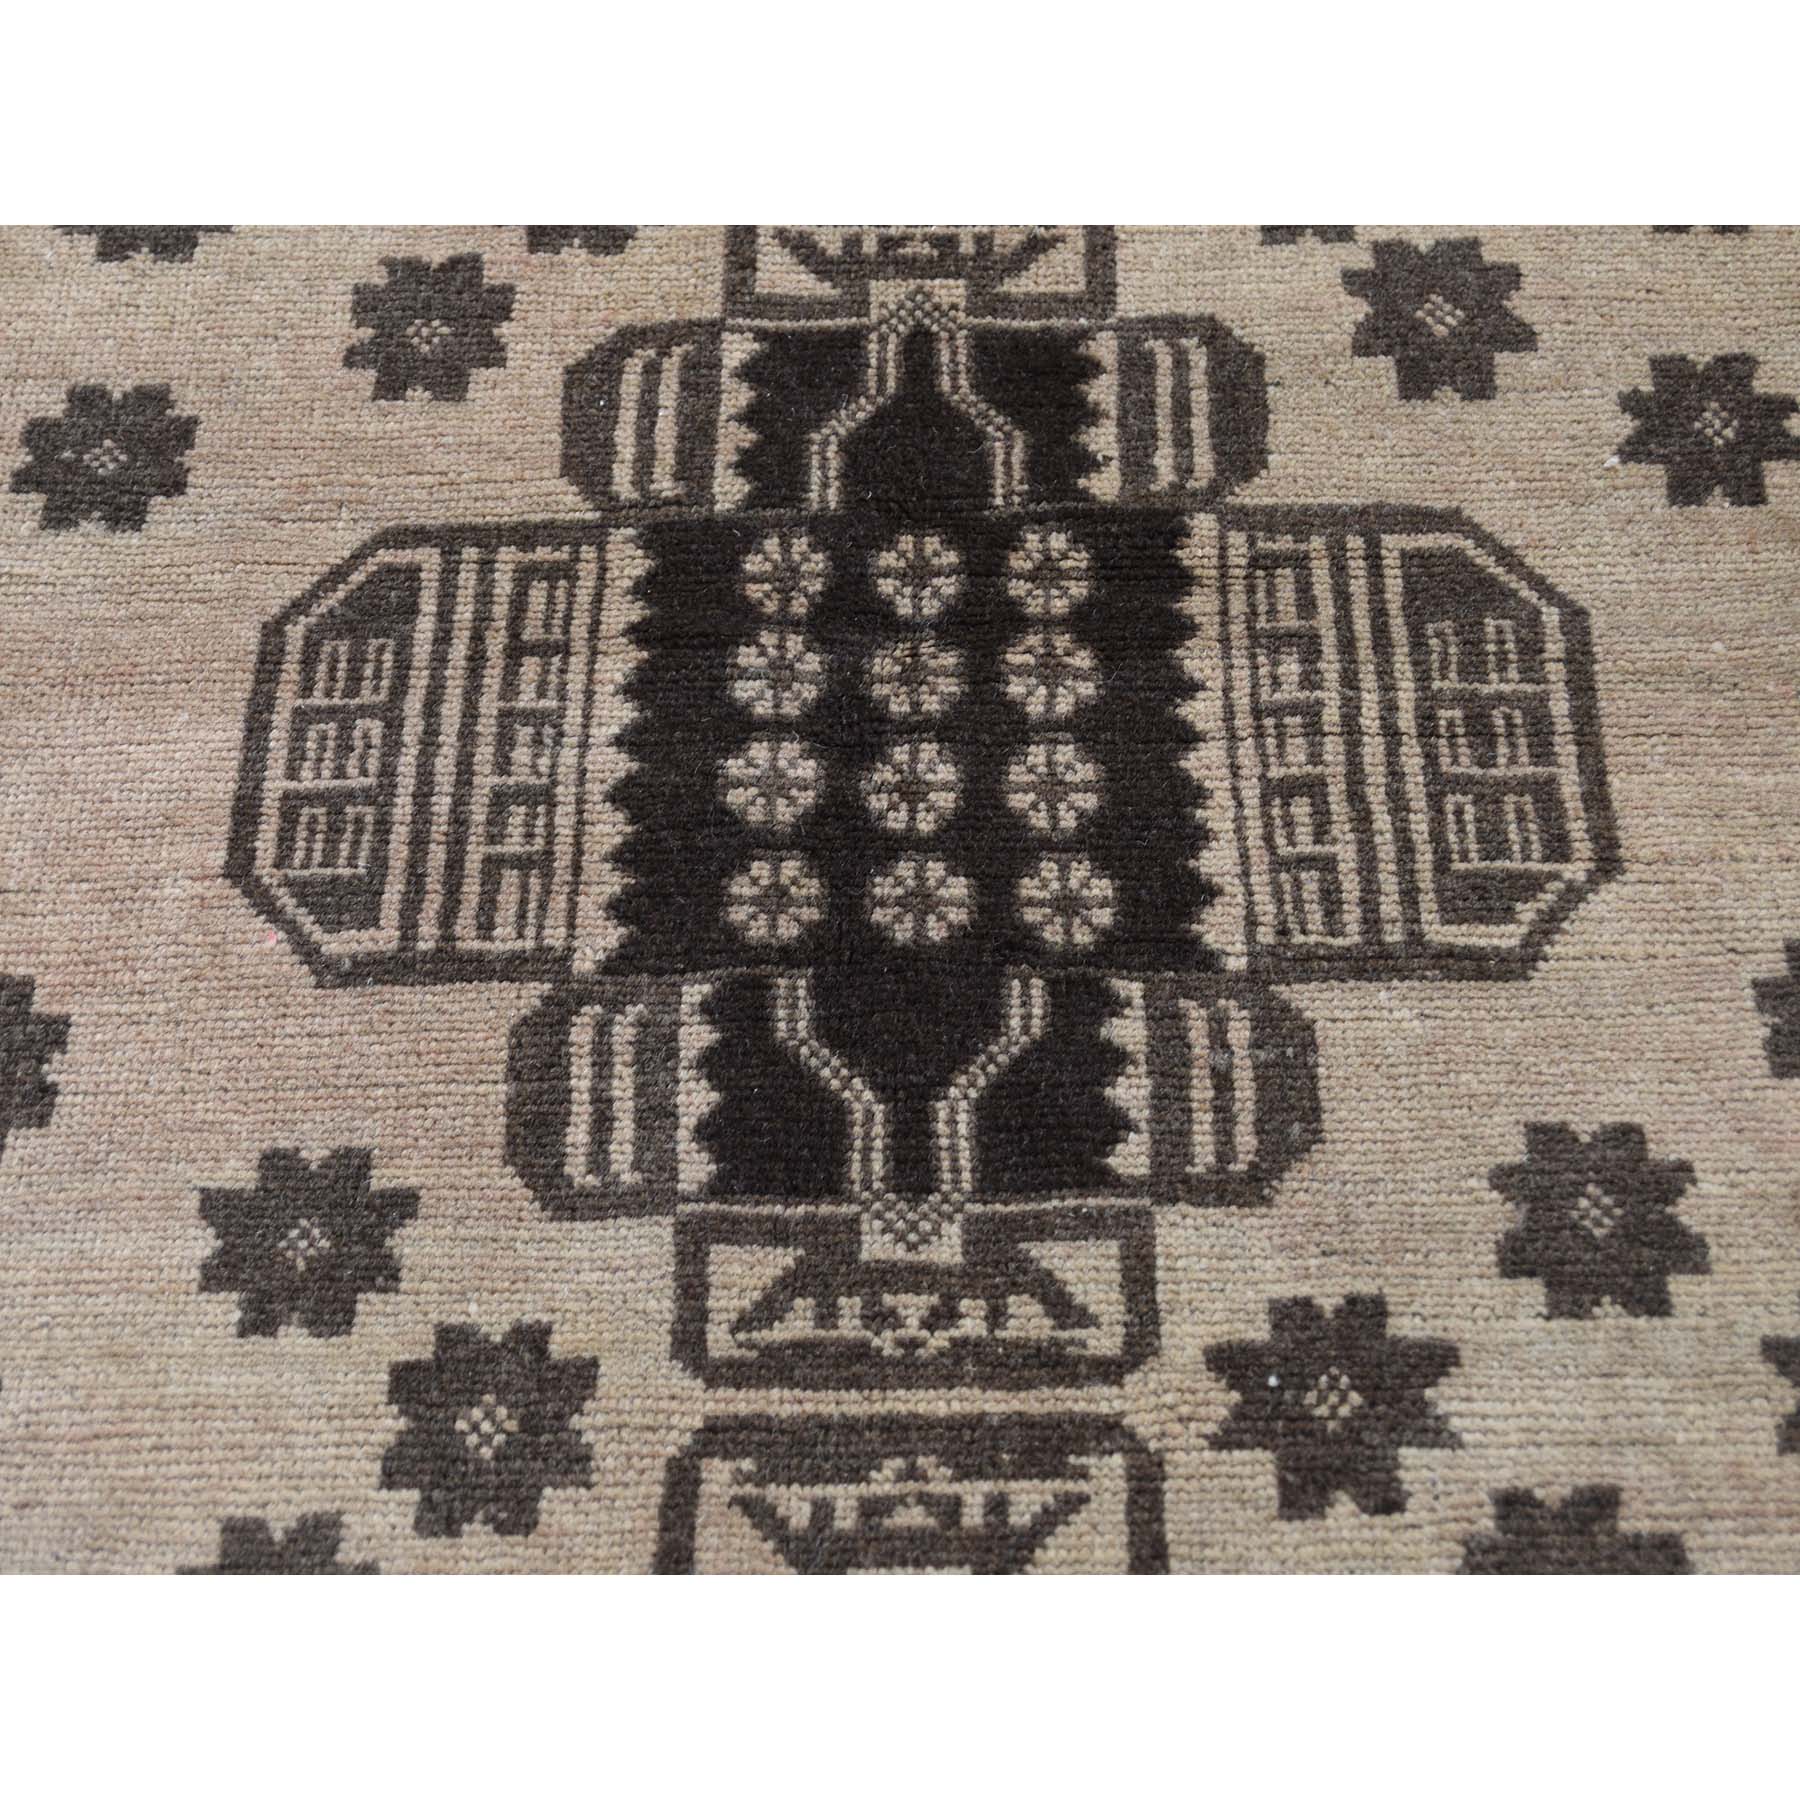 6'7"x9'8" Vintage Afghan Baluch Natural Color Hand Woven Pure Wool Oriental Rug 